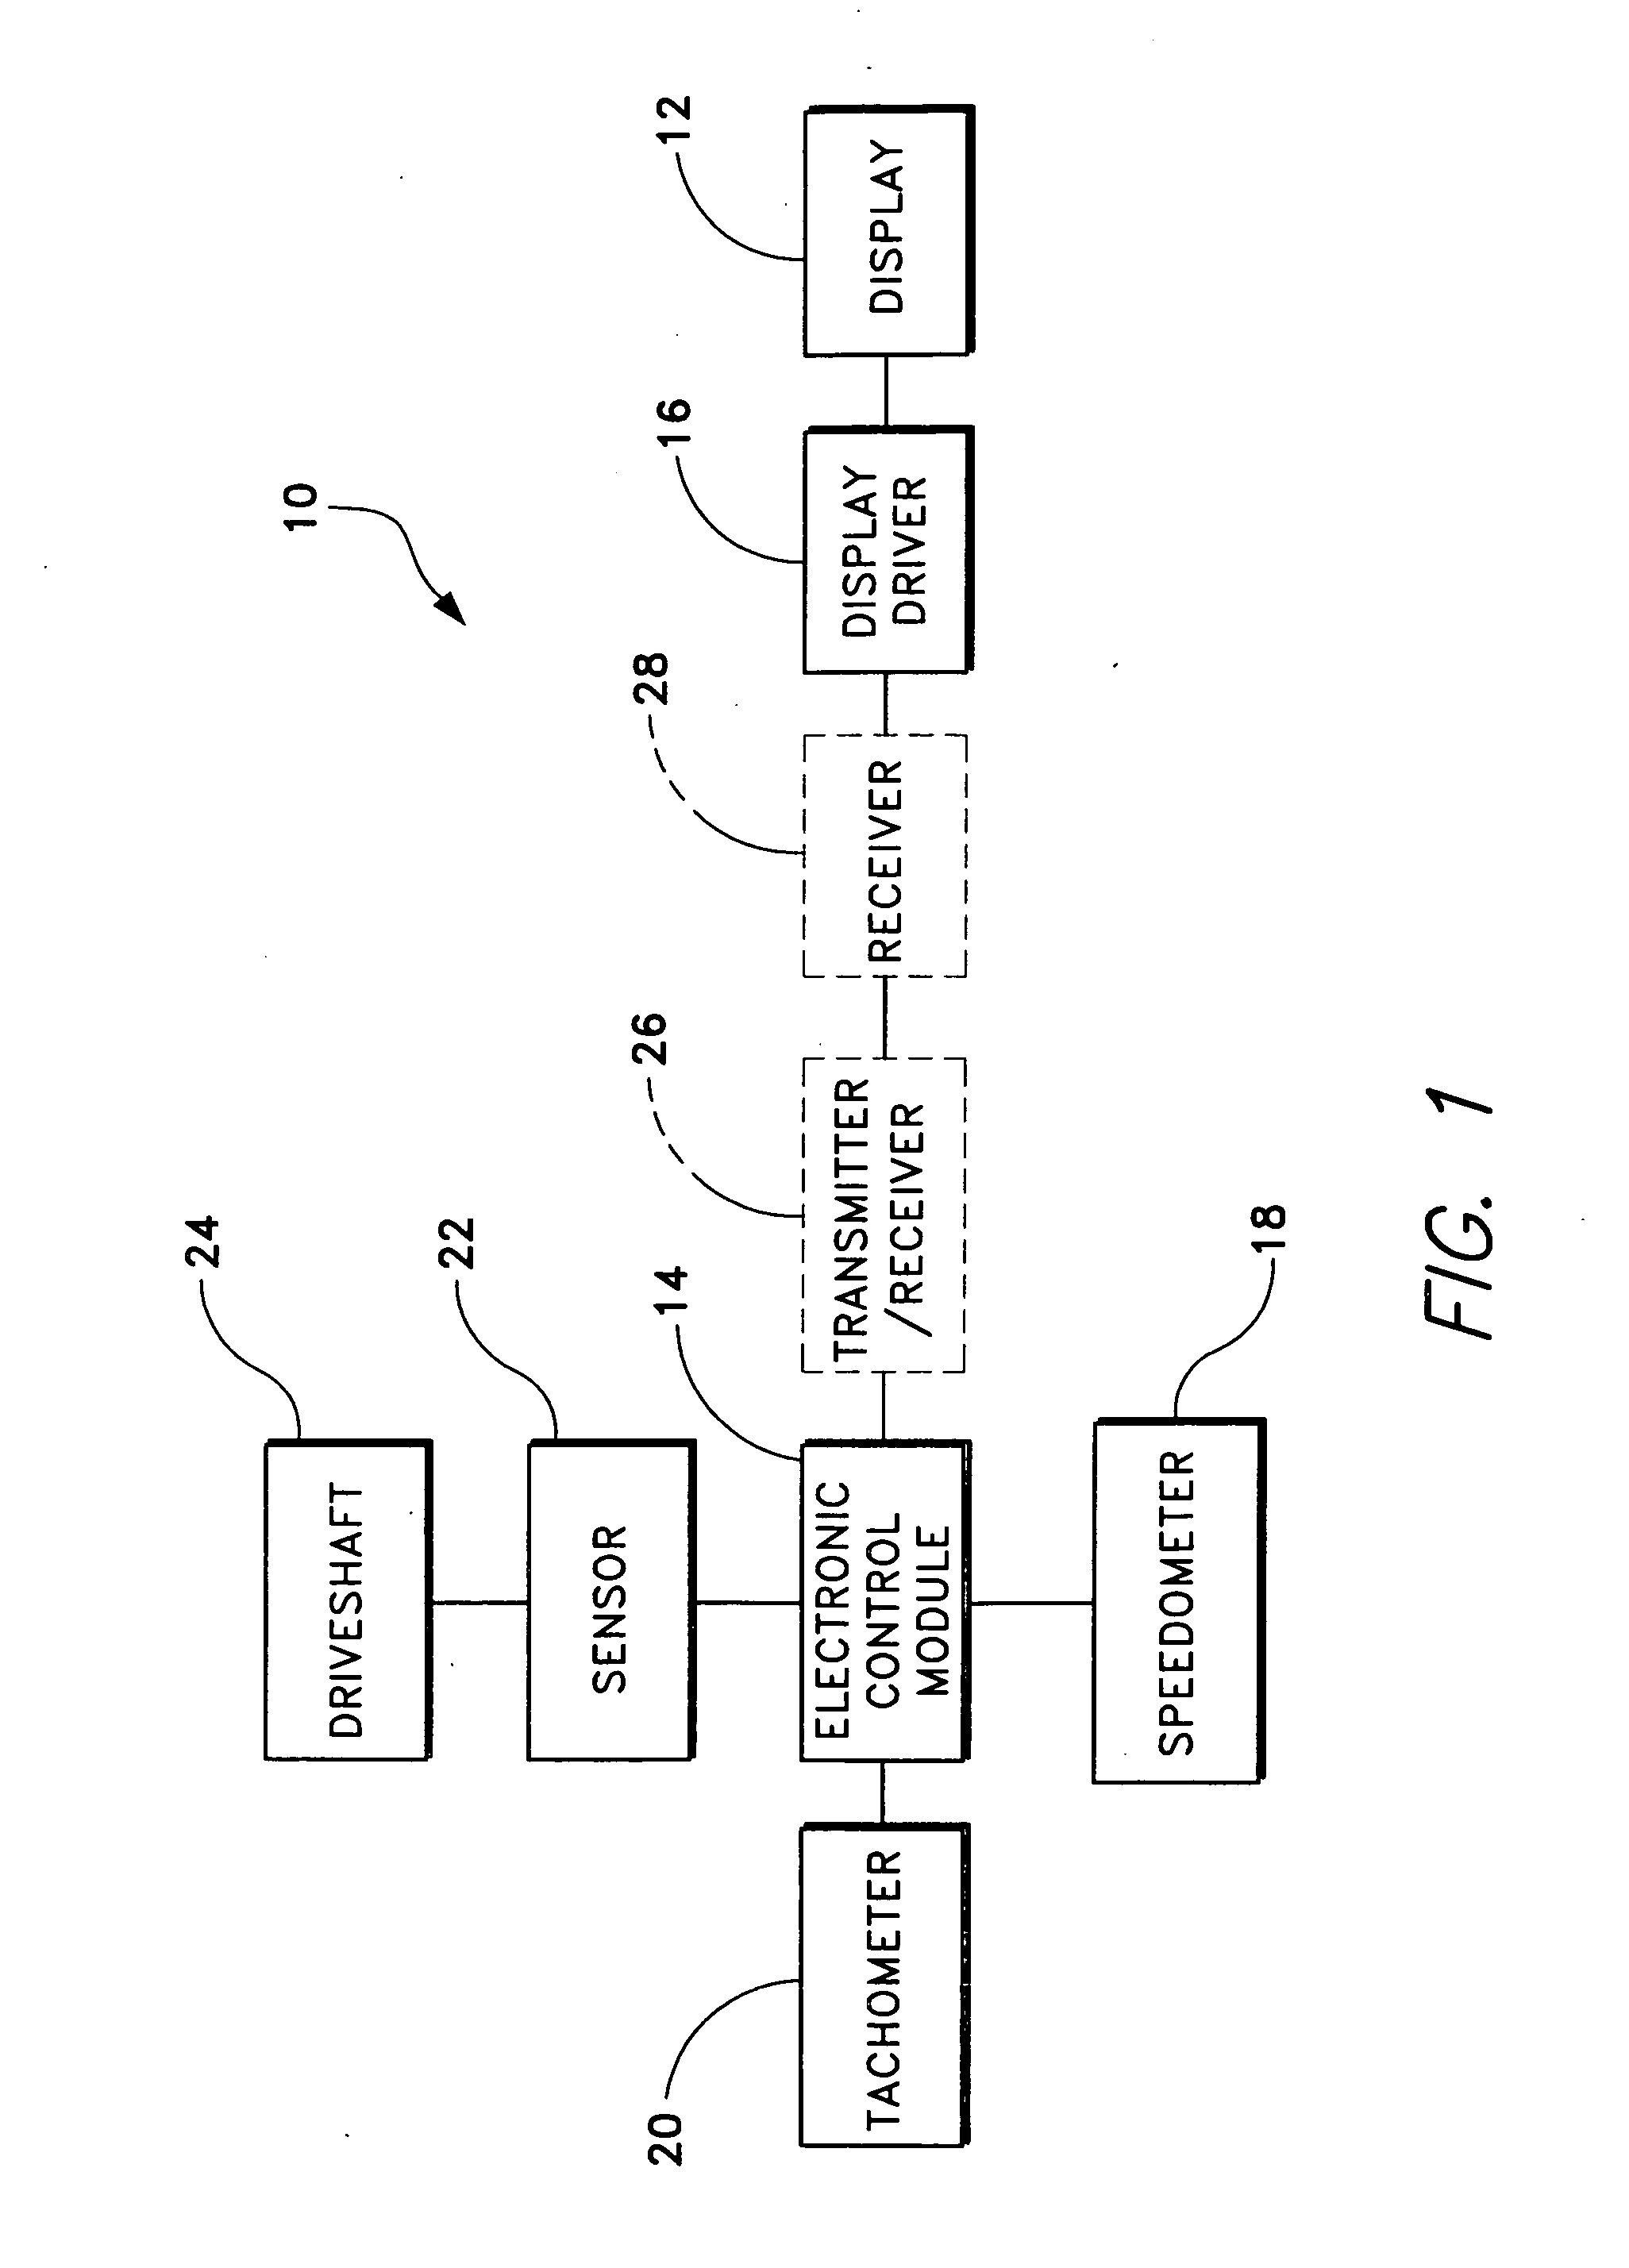 Electronic display system